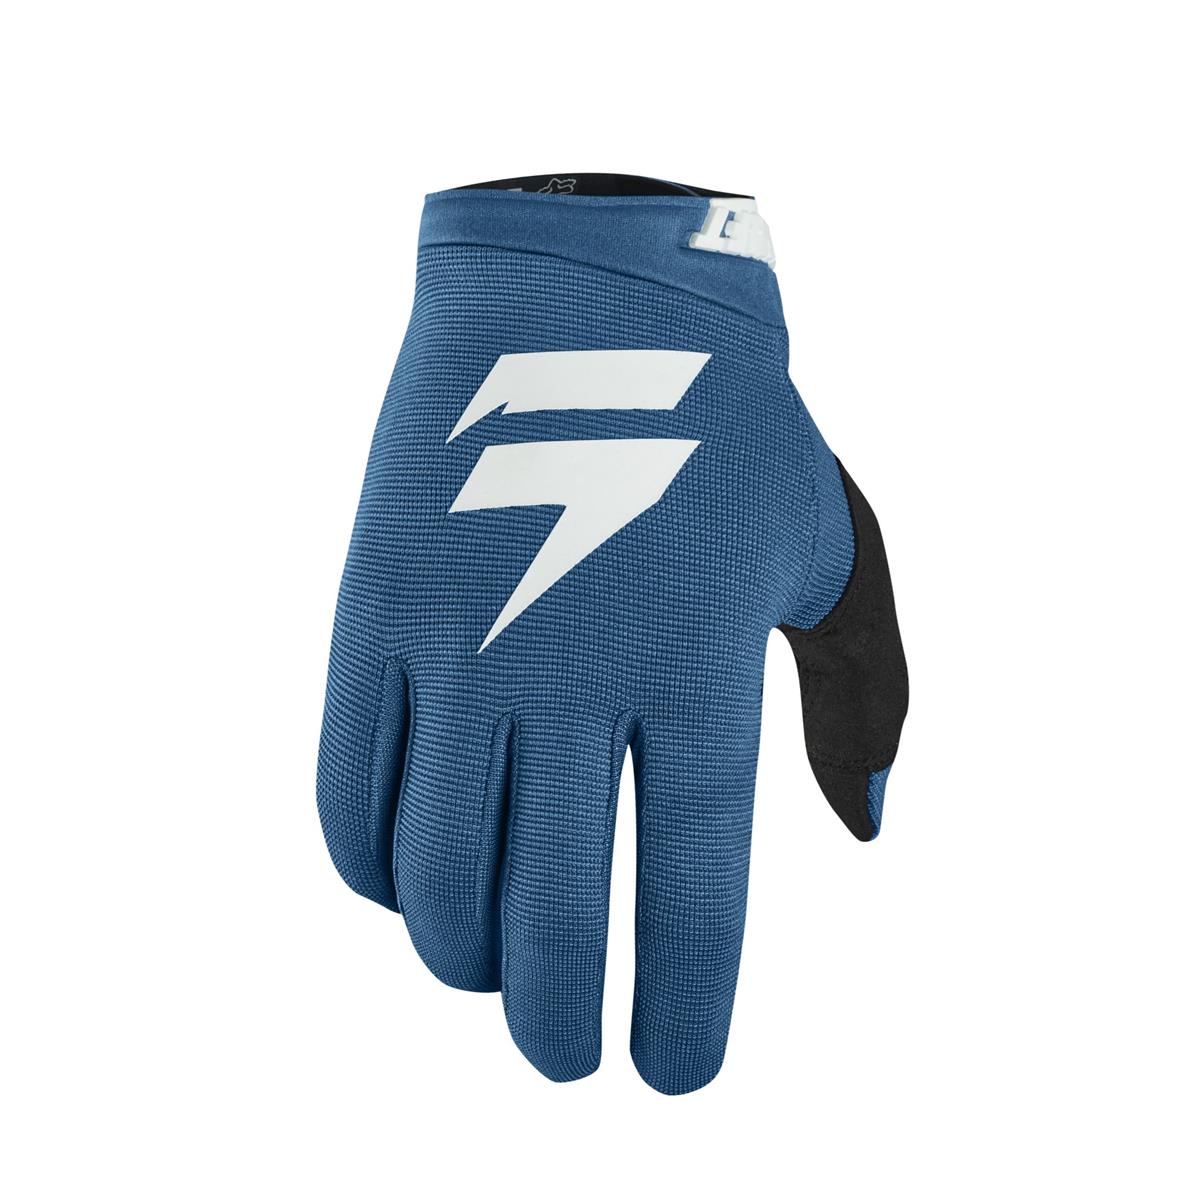 Shift Gloves Whit3 Label Air Blue